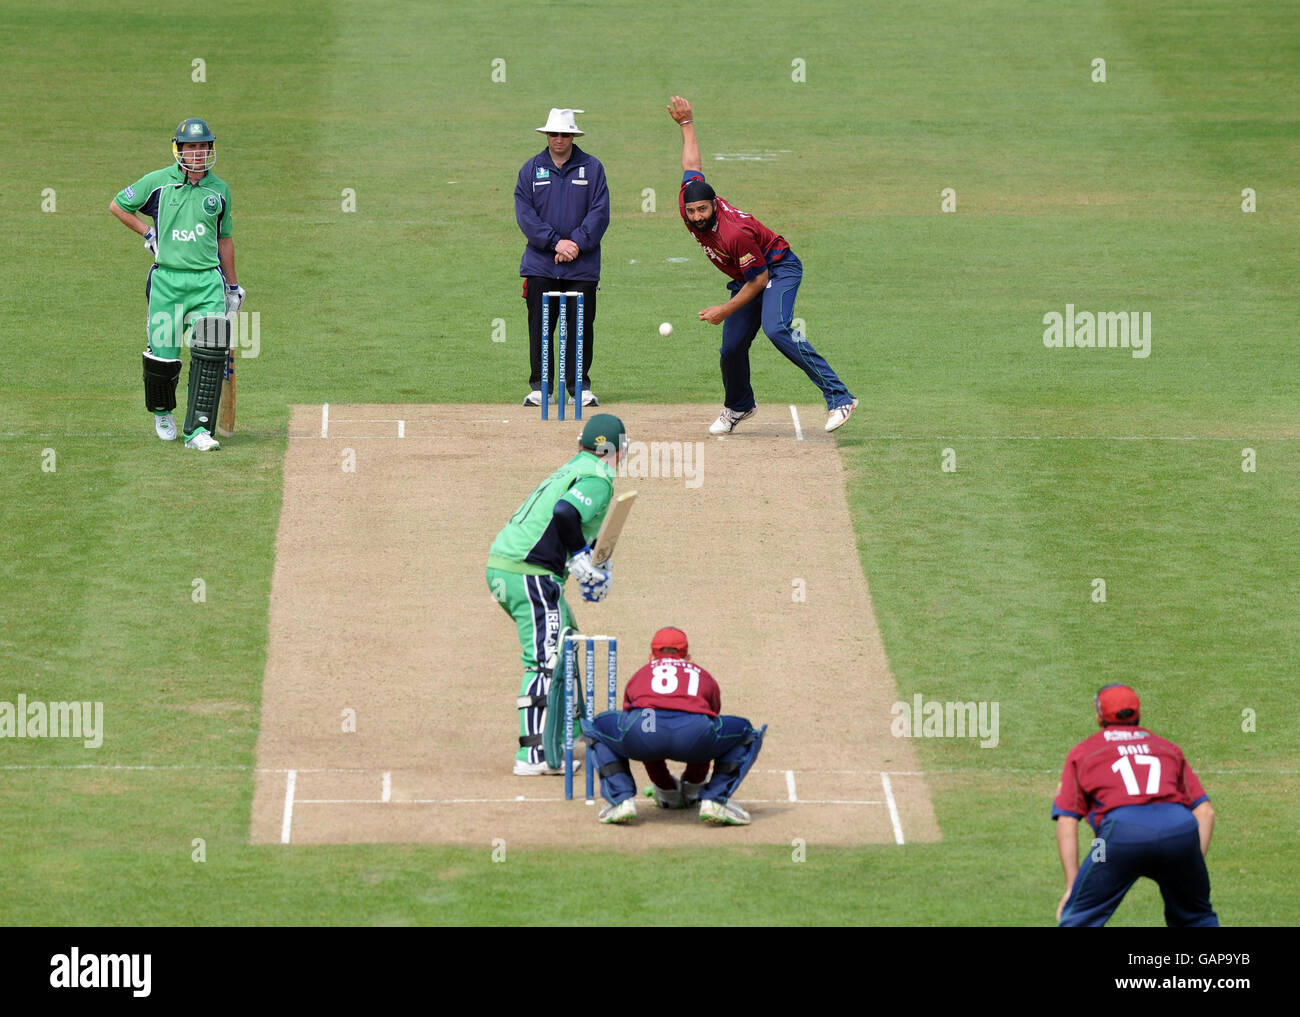 Northamptonshire's Monty Panesar bowls to Ireland's Paul Stirling during the Friends Provident Trophy match at the County Ground, Northampton. Stock Photo